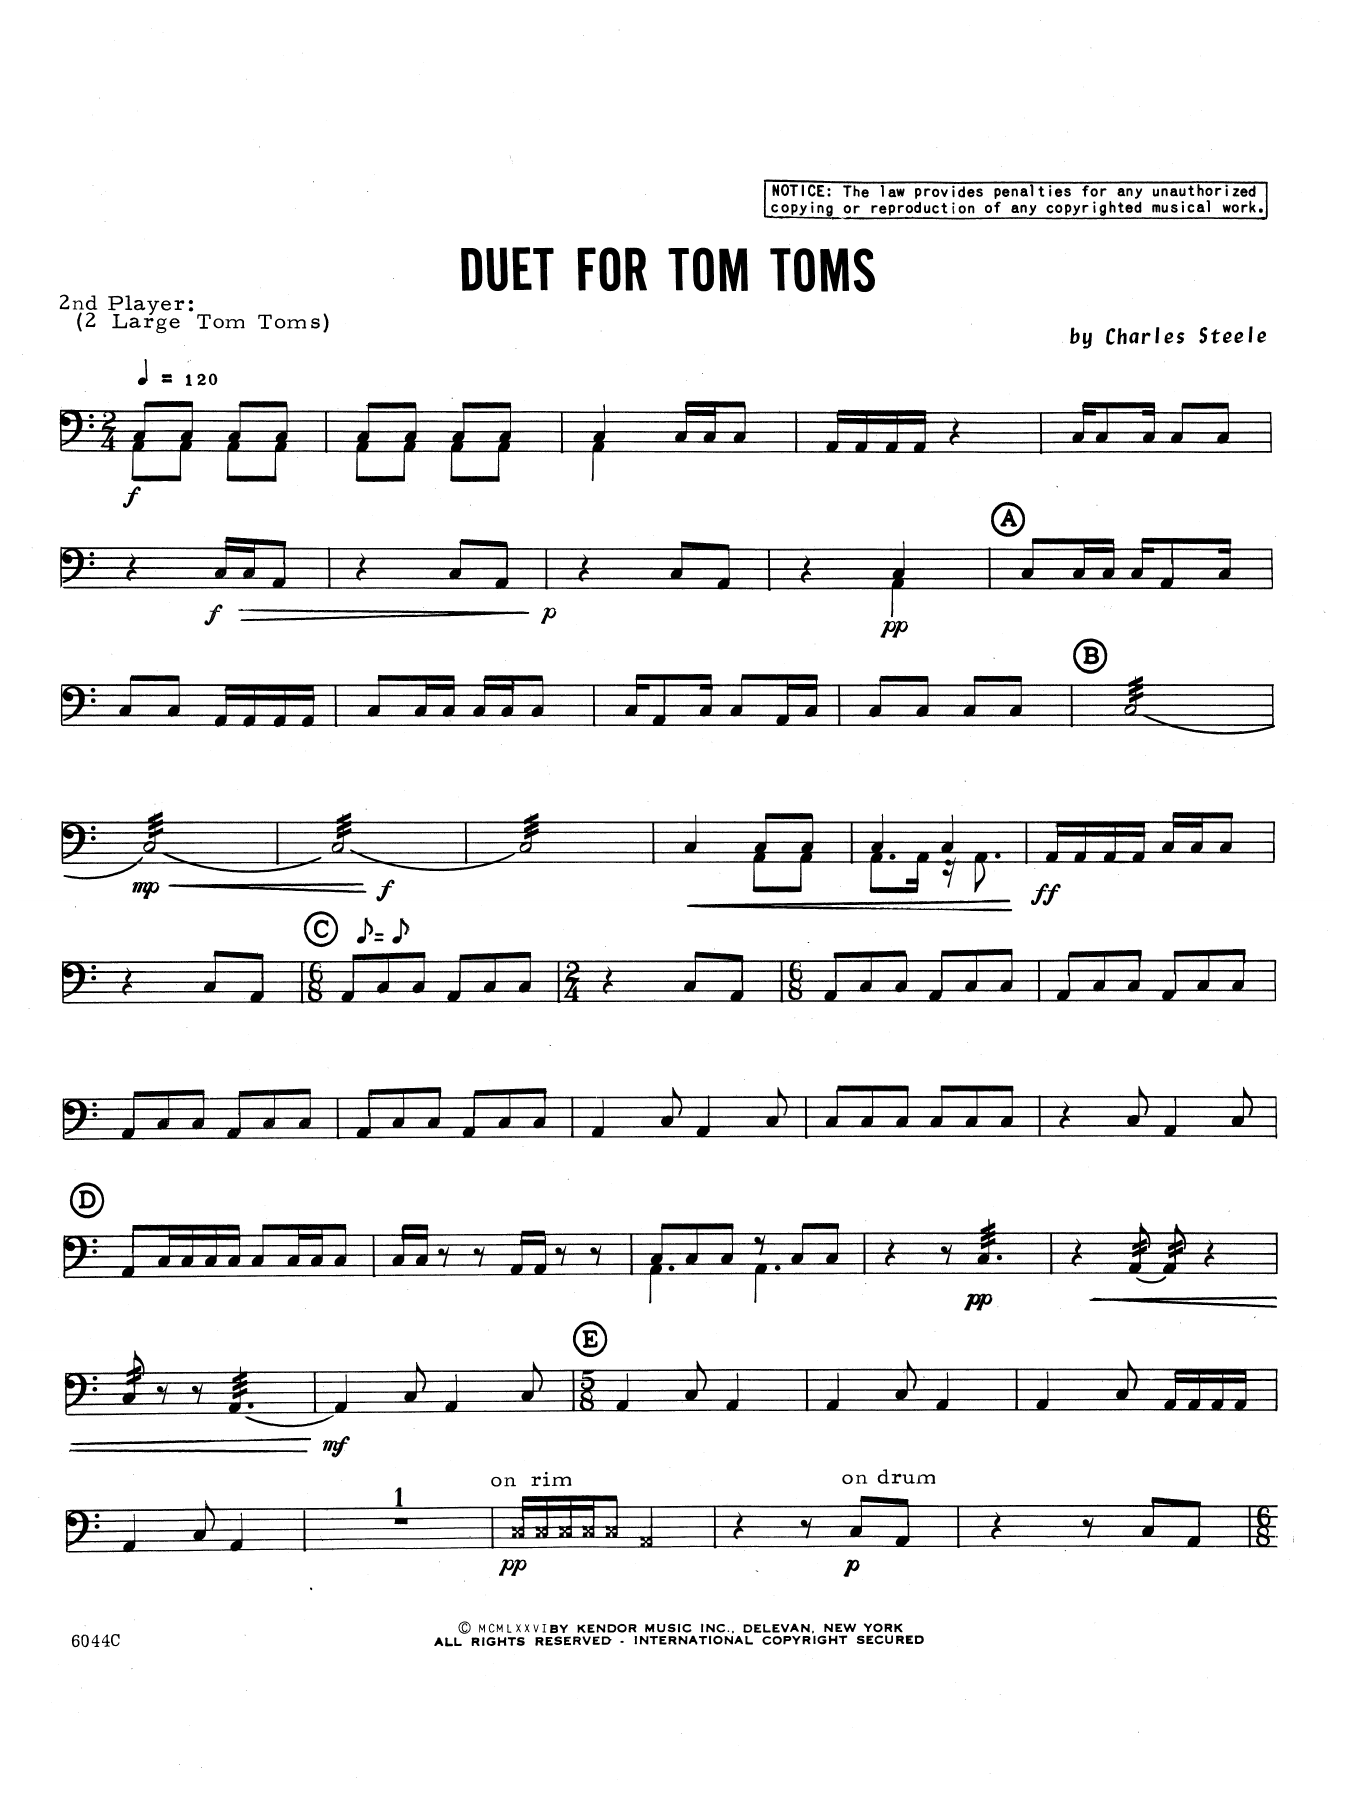 Download Charles Steele Duet For Tom Toms - Percussion 2 Sheet Music